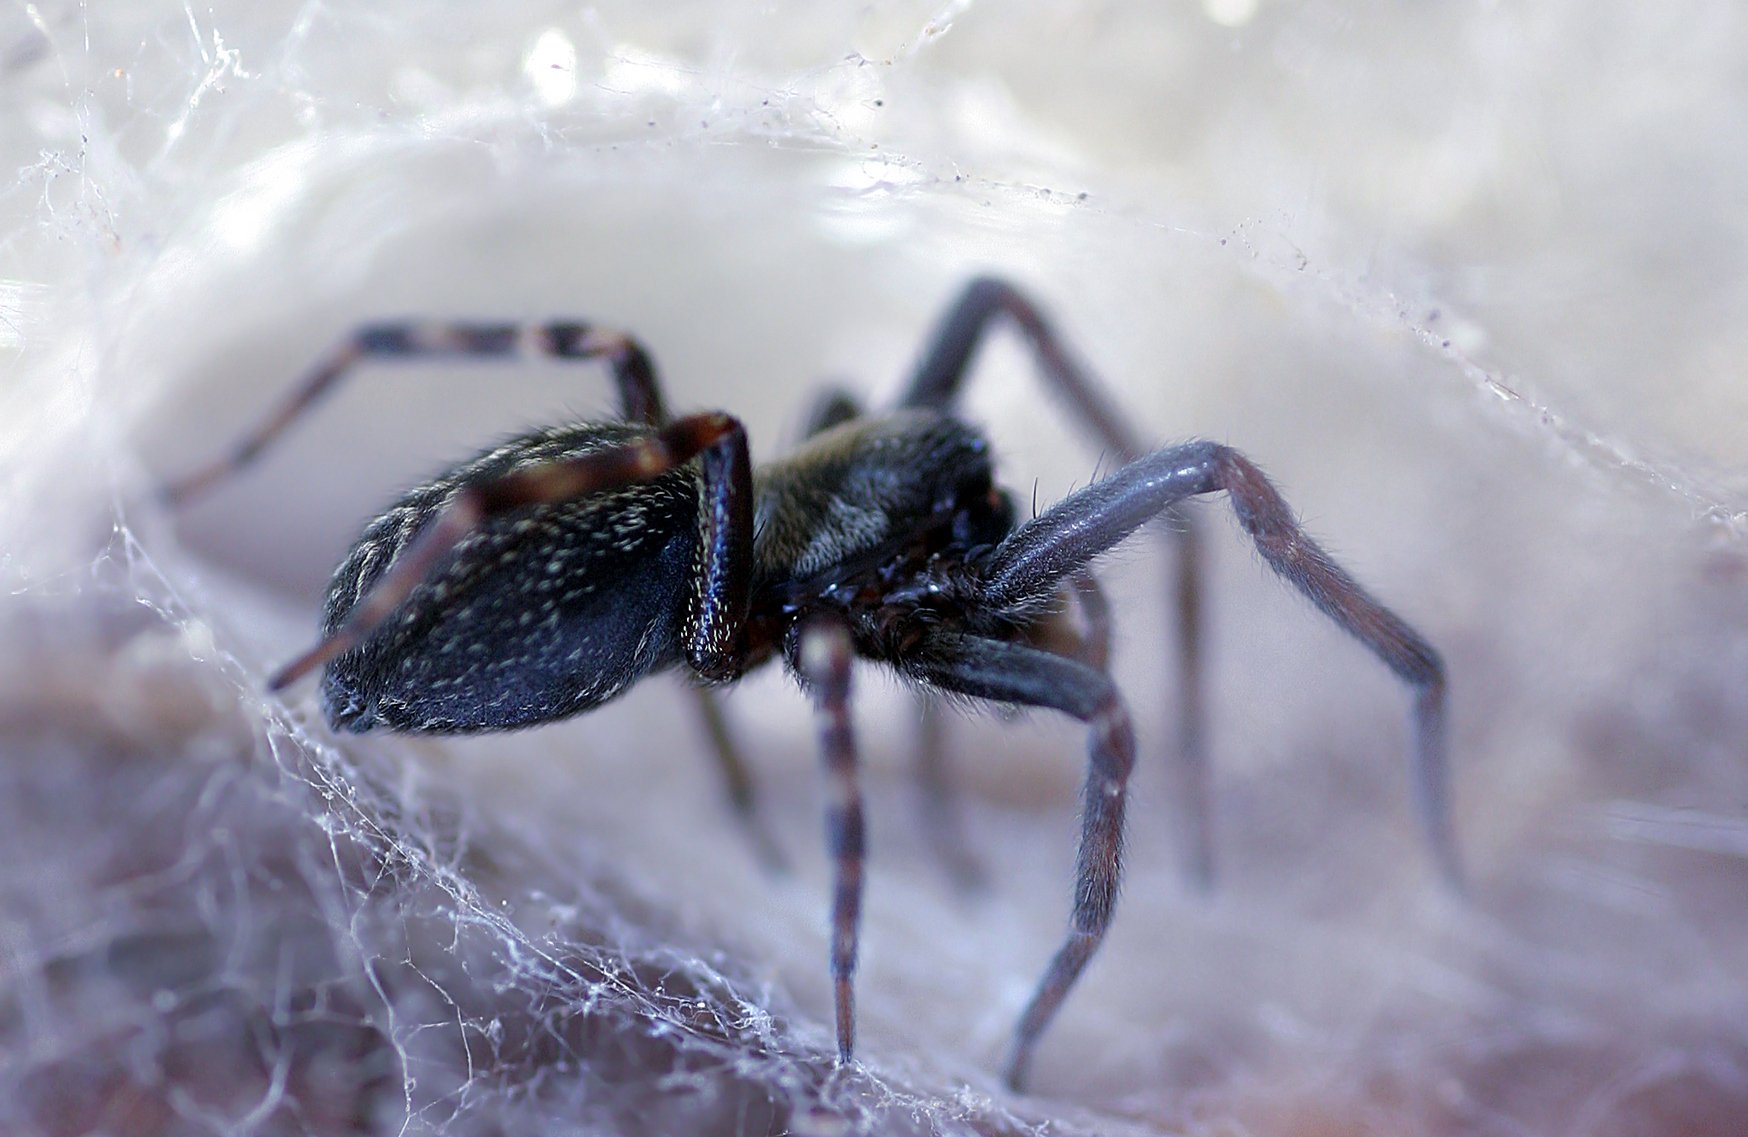 black house spider pictures